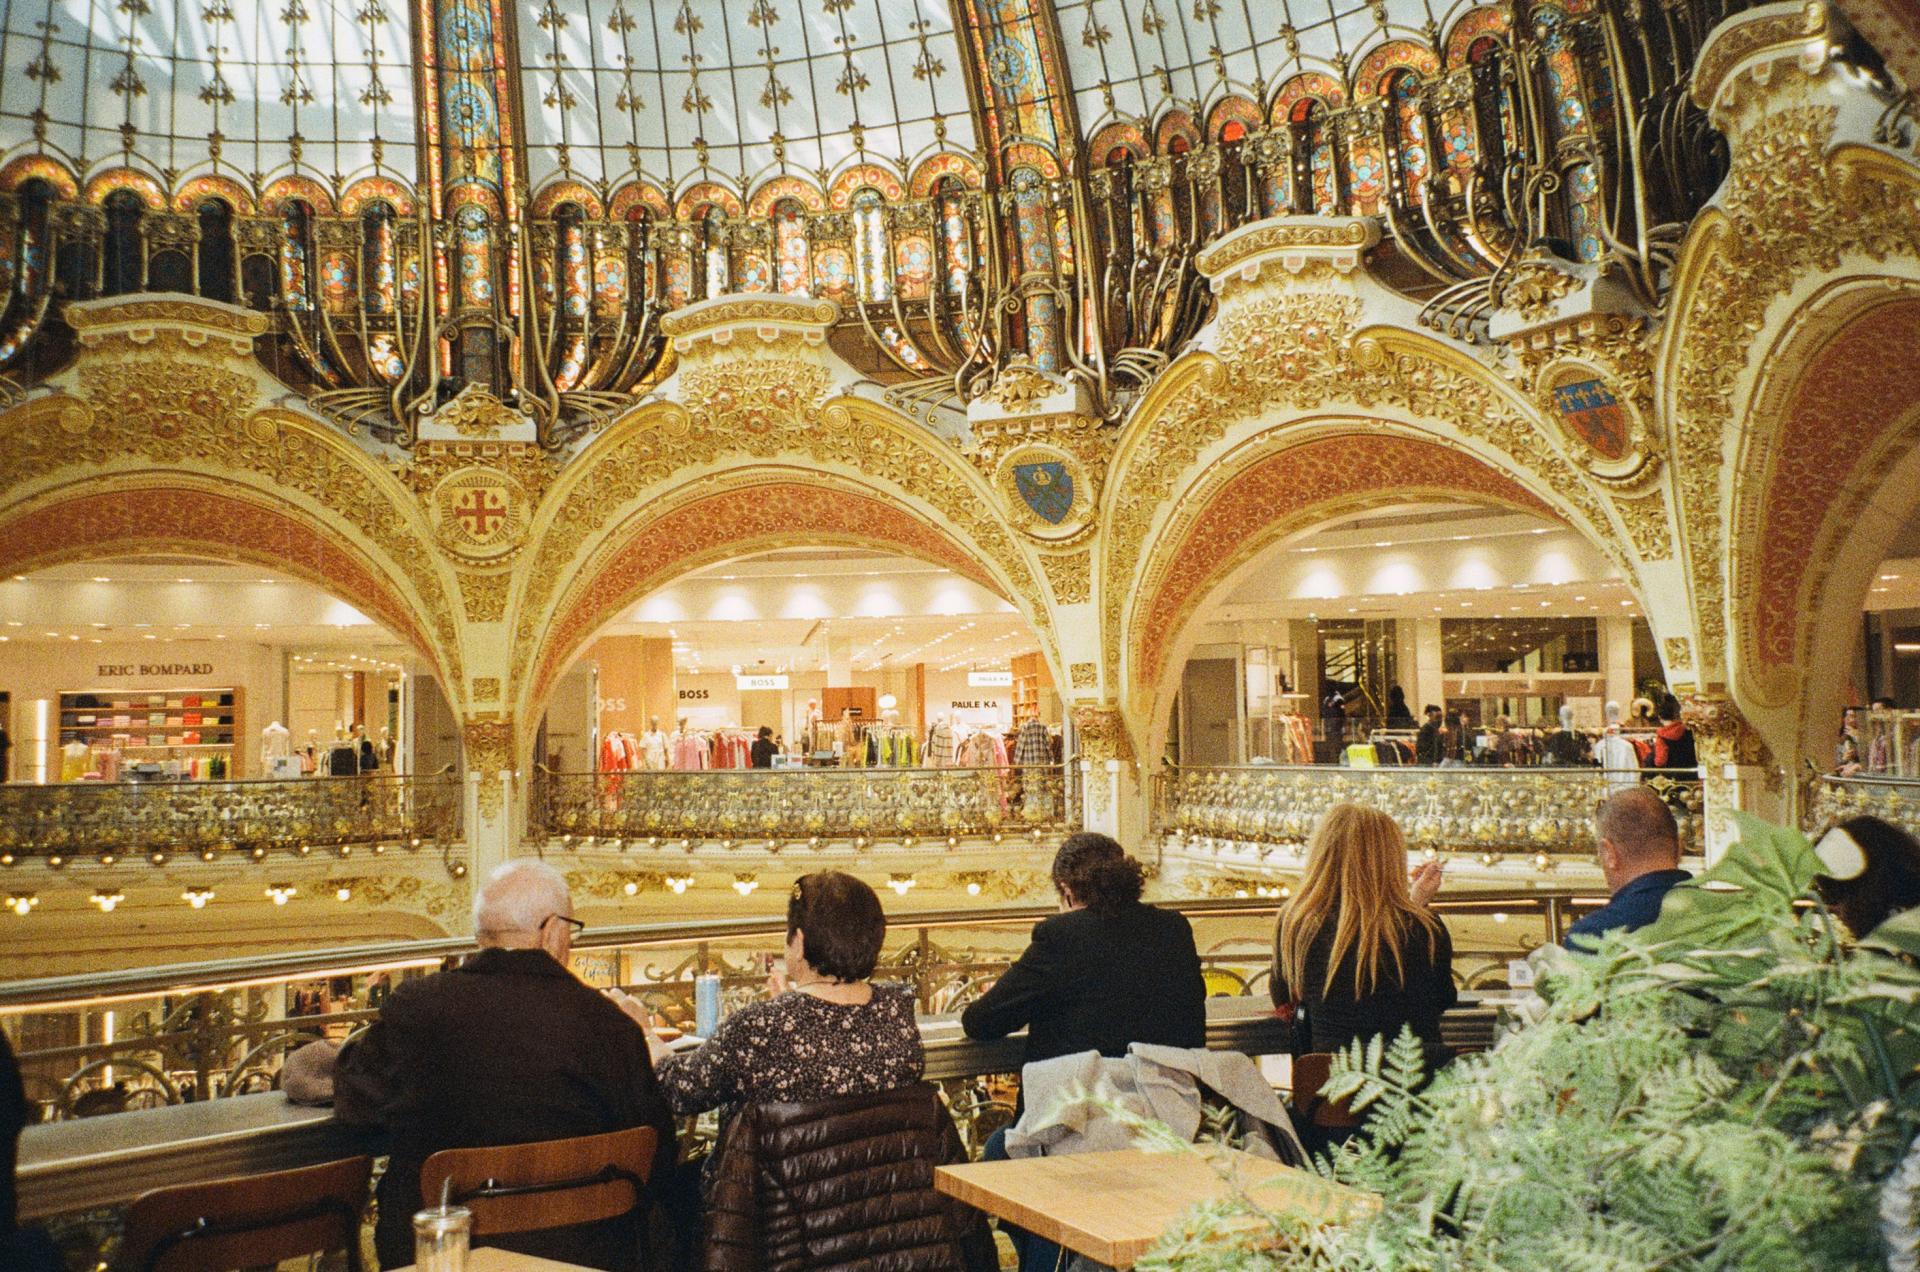 The Christmas decorations at Galeries Lafayette